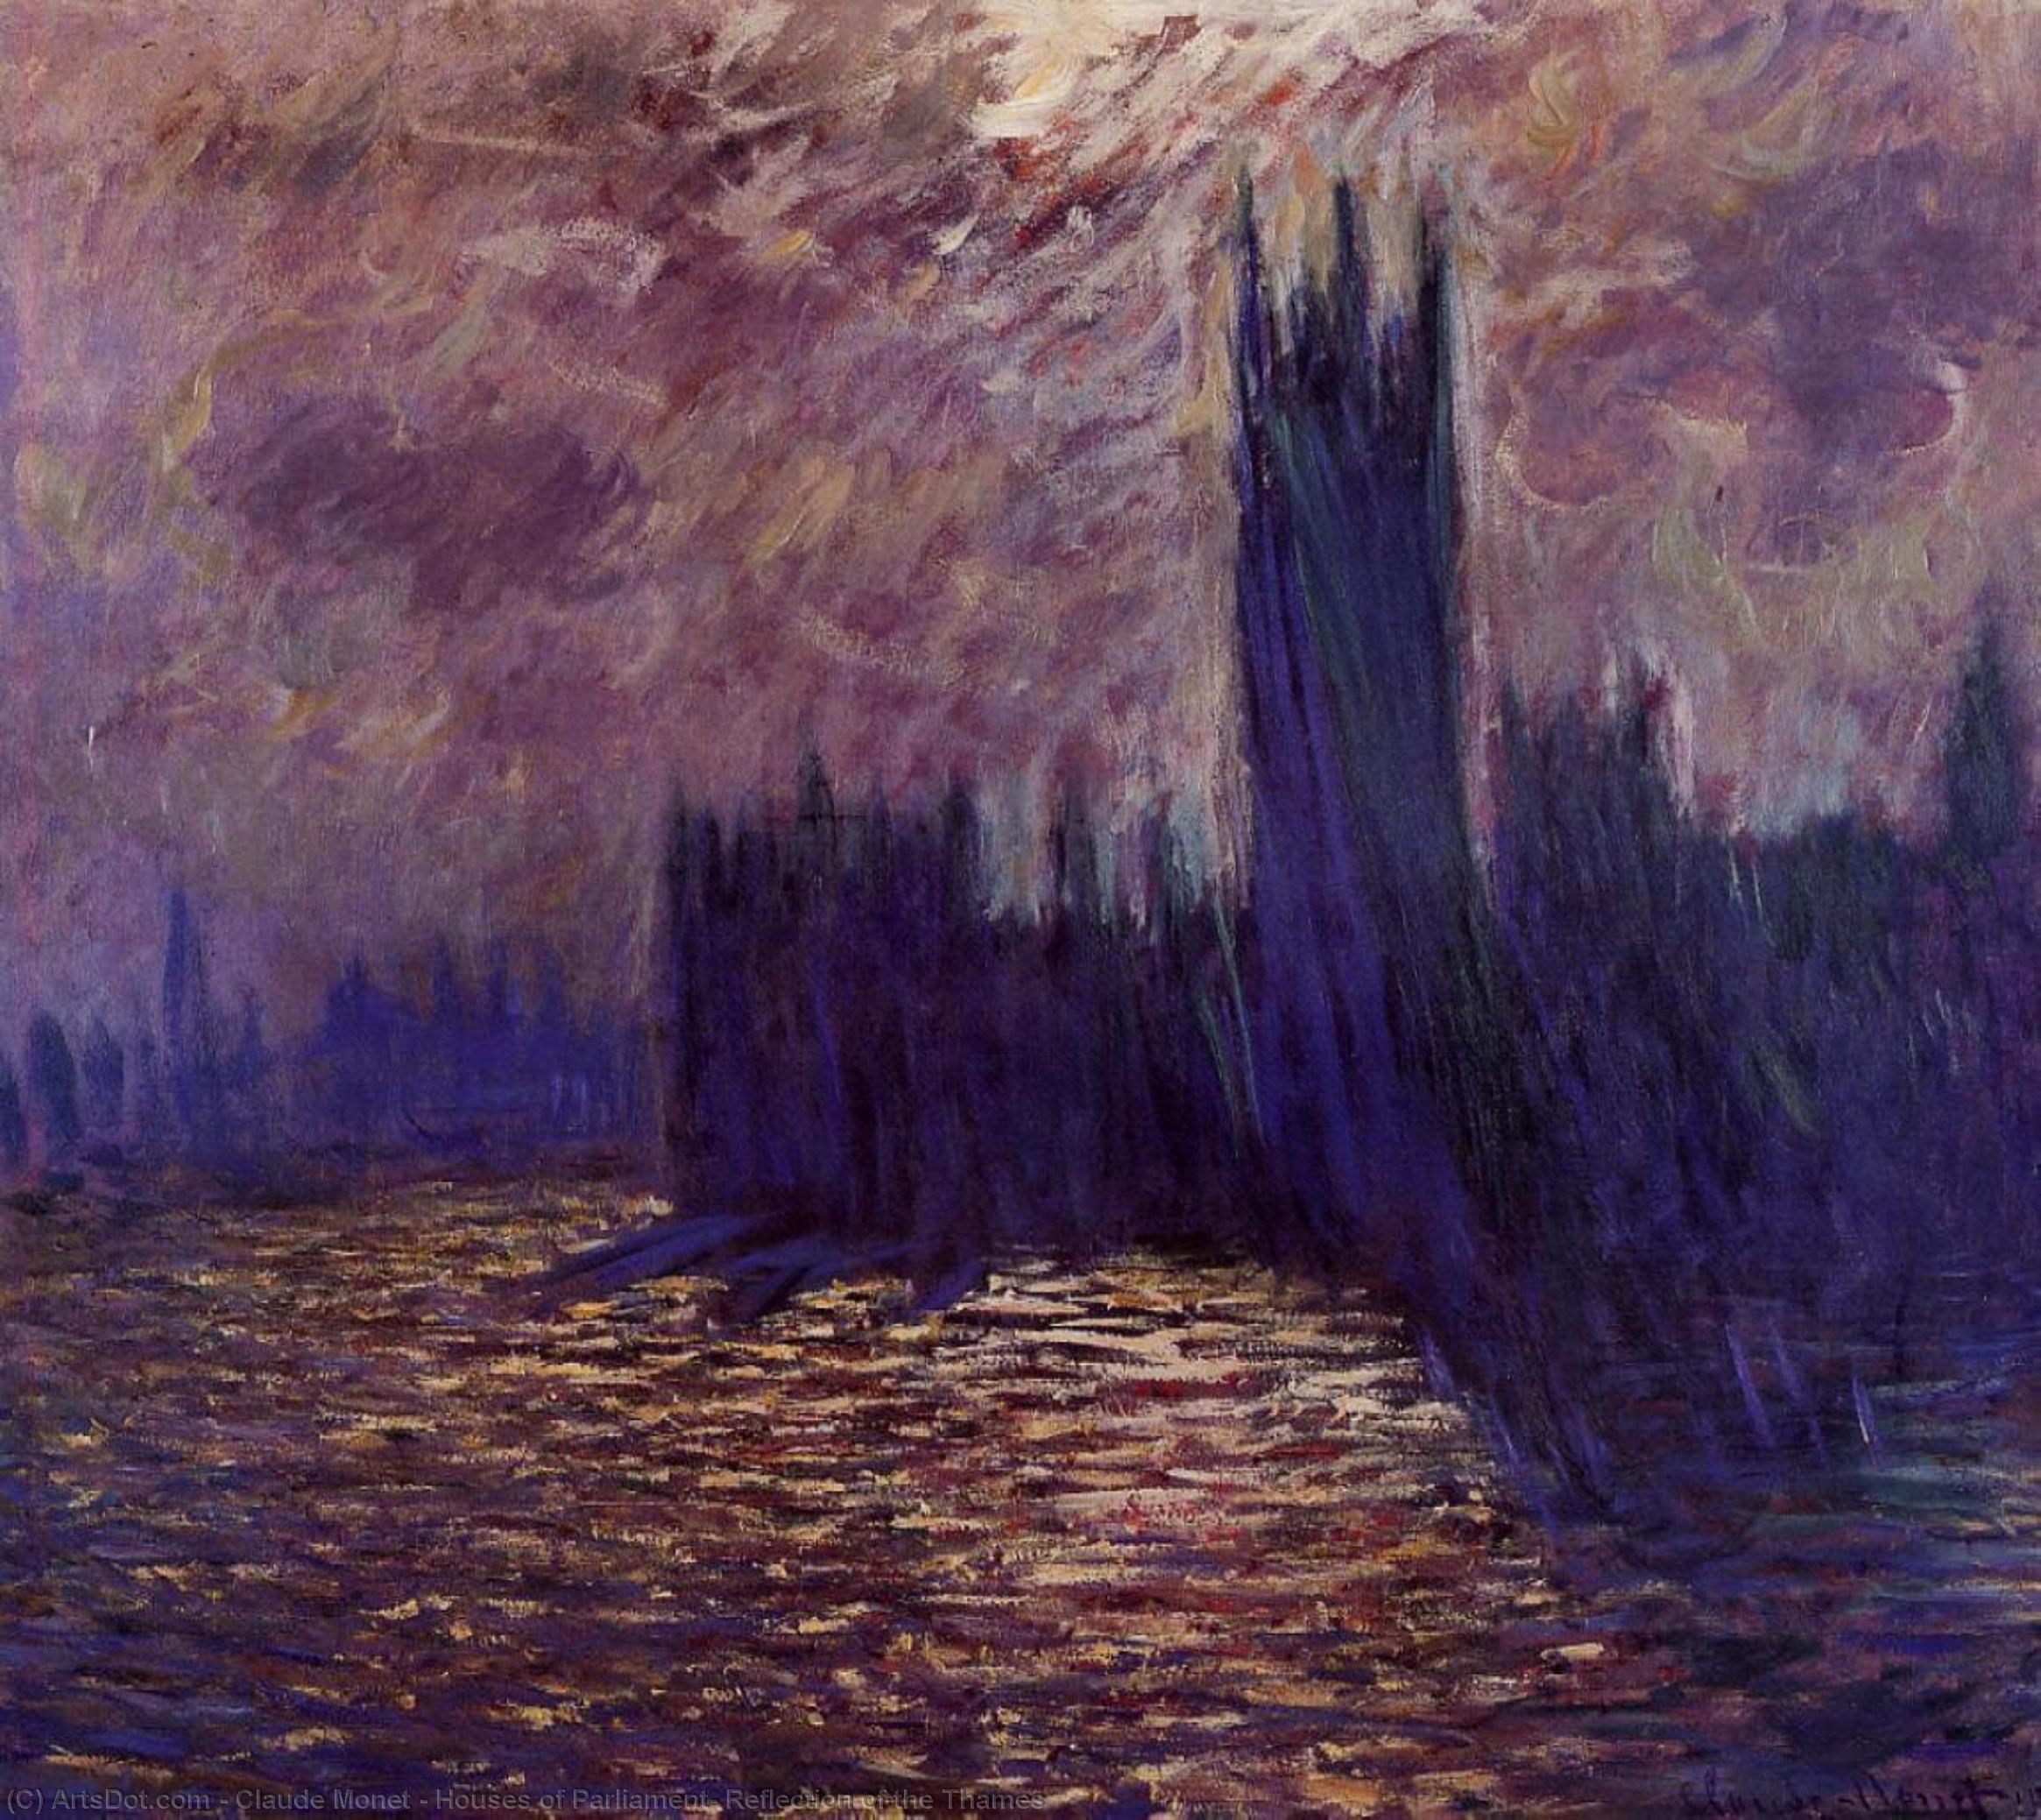 Order Paintings Reproductions Houses of Parliament, Reflection of the Thames, 1900 by Claude Monet (1840-1926, France) | ArtsDot.com